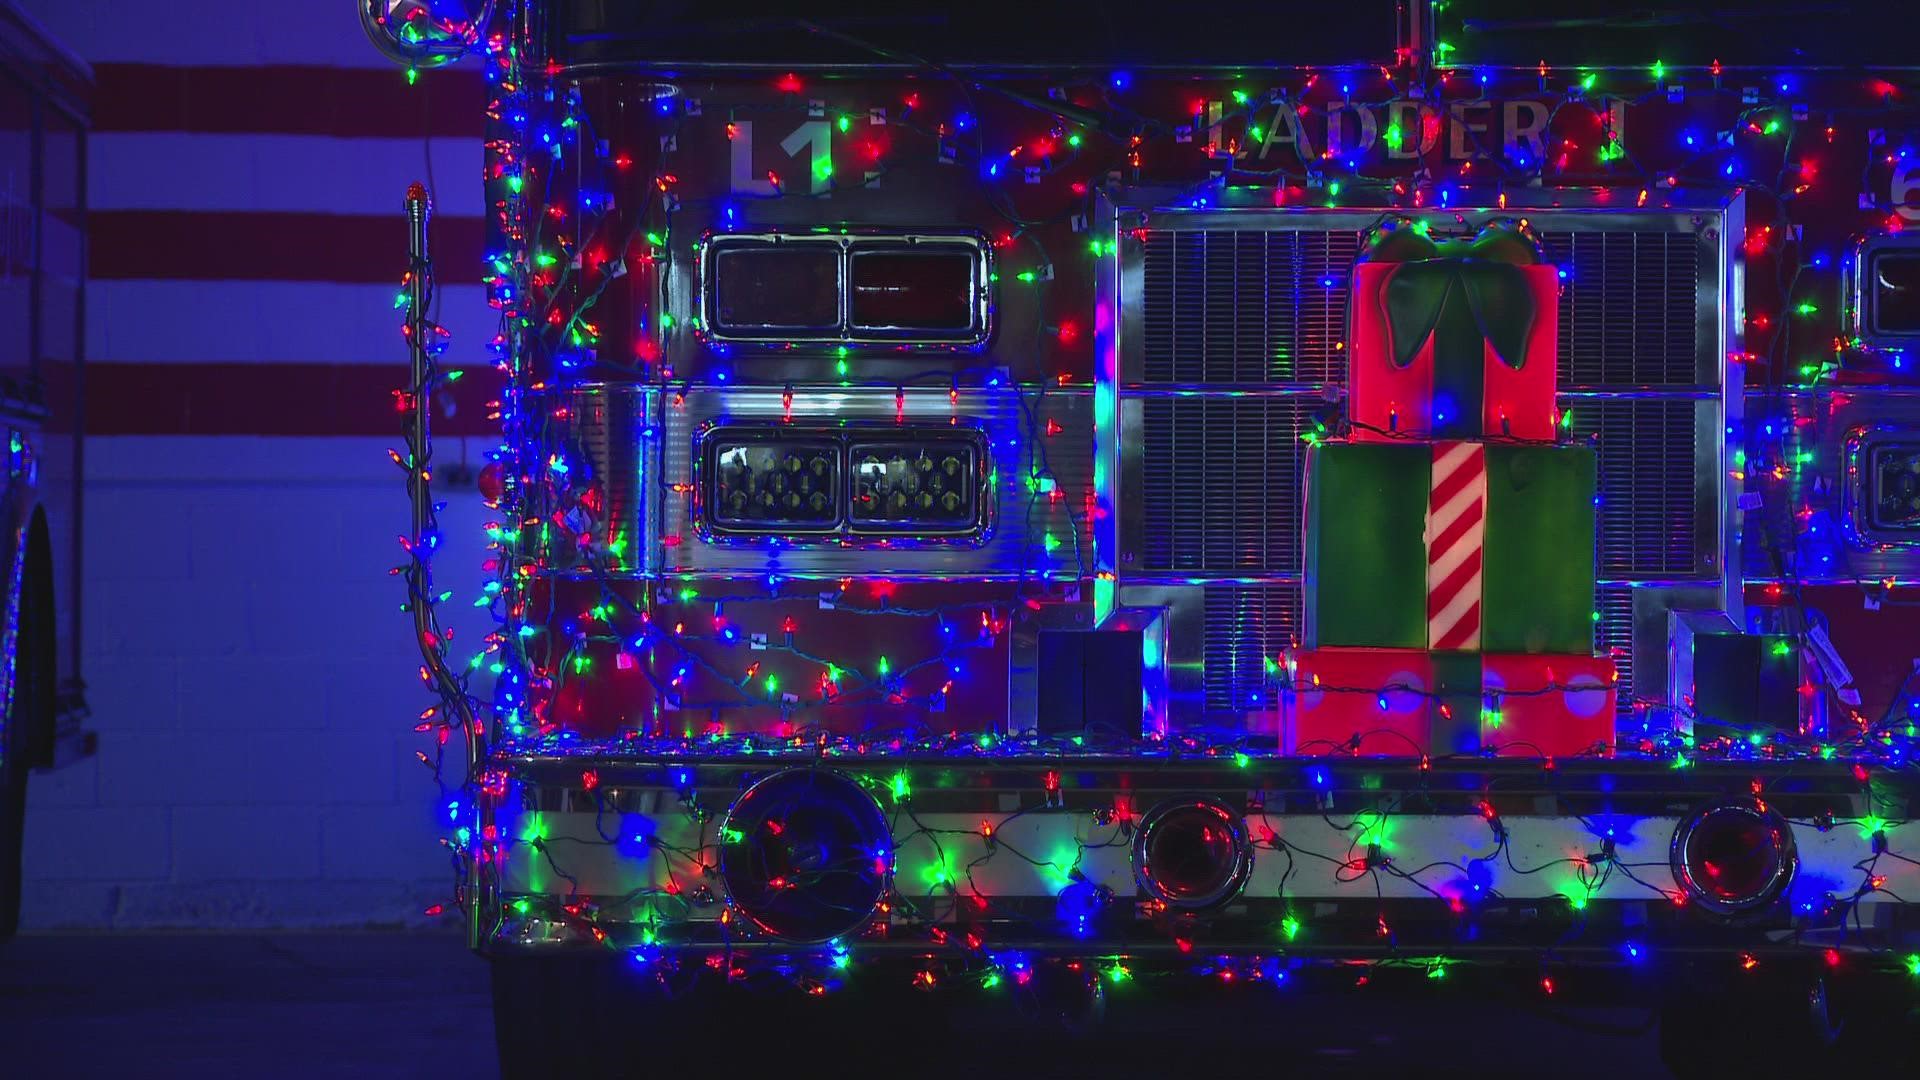 The department is preparing the truck with thousands of lights ahead of doing tours of various neighborhoods.